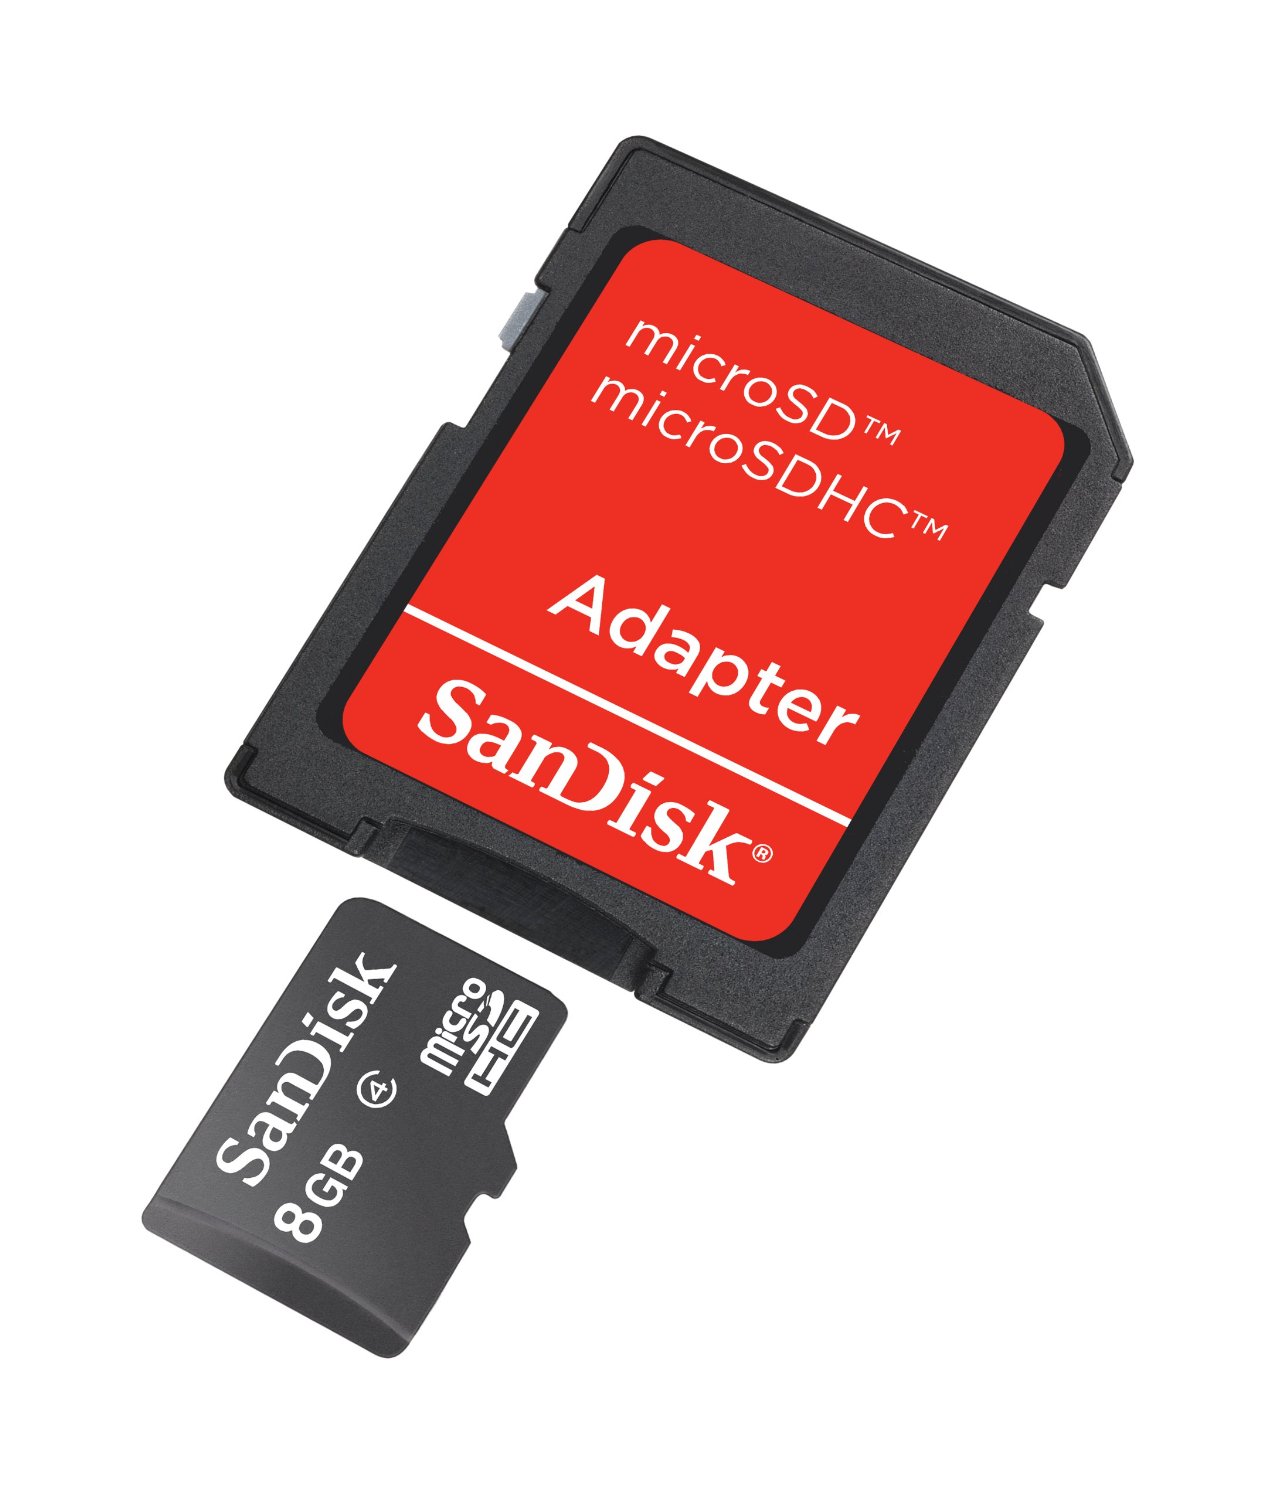 Sandisk Micro Sdhc 8gb Card With Adapter External Data Storage Sd Cards